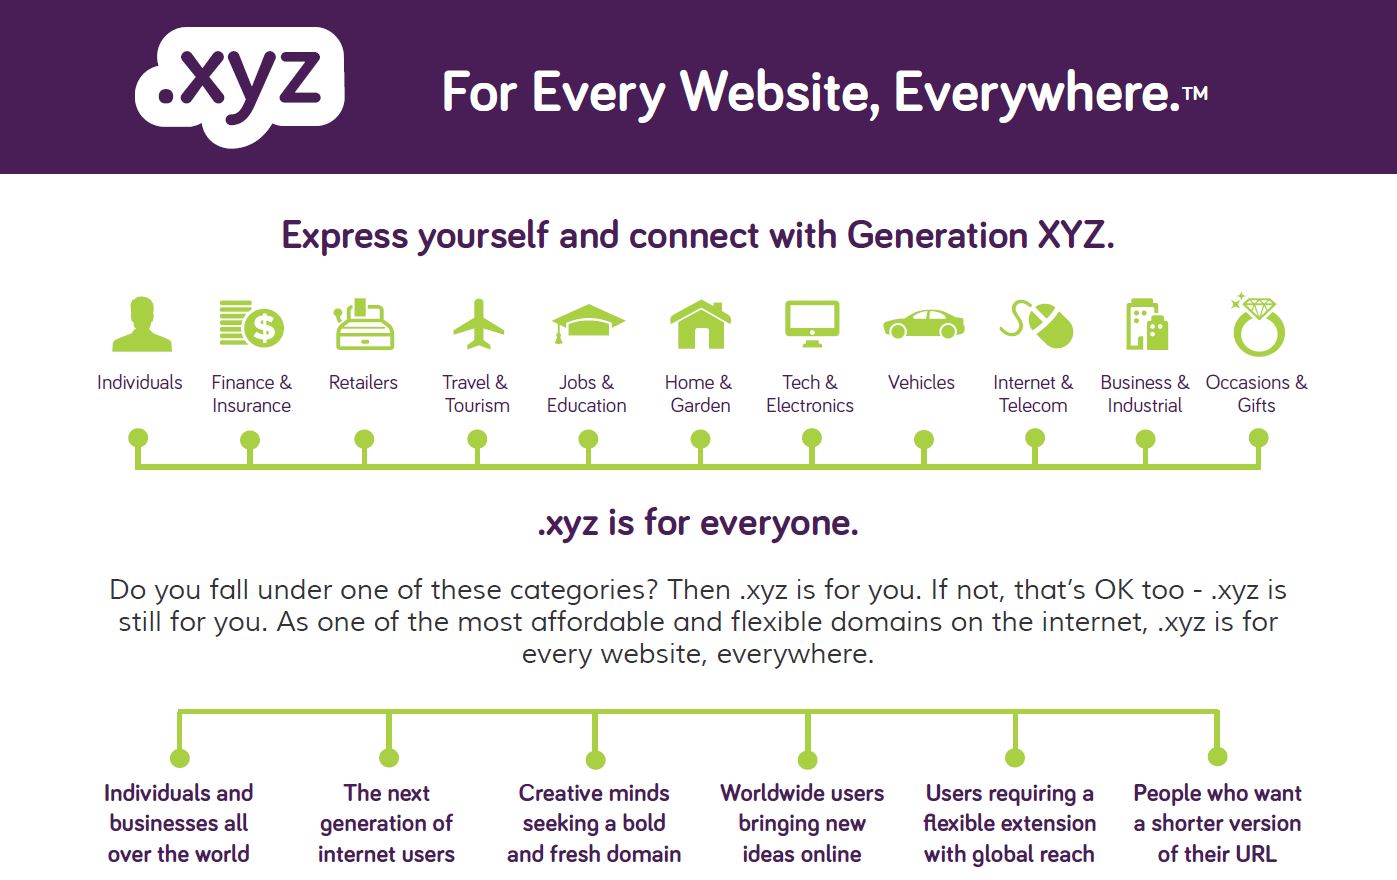 .xyz is for everyone. Express yourself and connect with Generation XYZ.